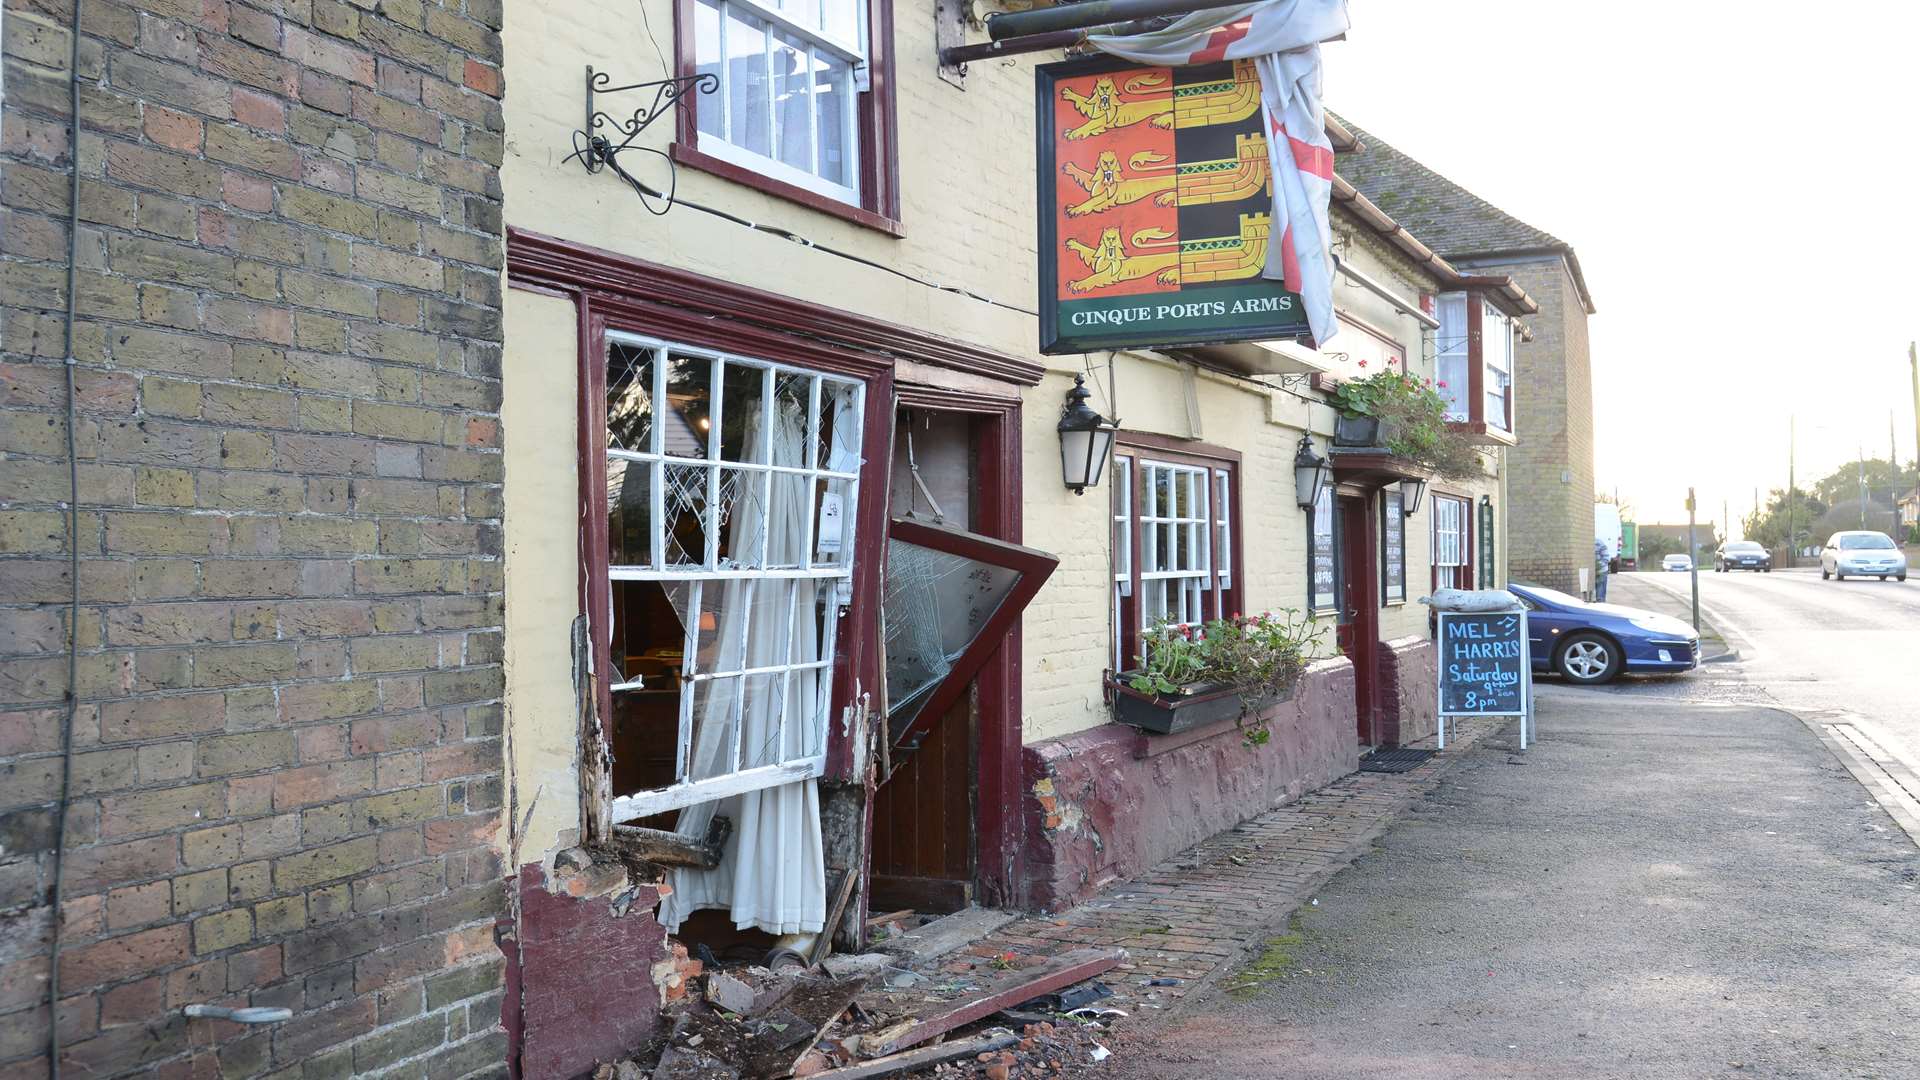 Aftermath of the crash at the Cinque Port Arms, New Romney. Picture: Gary Browne.